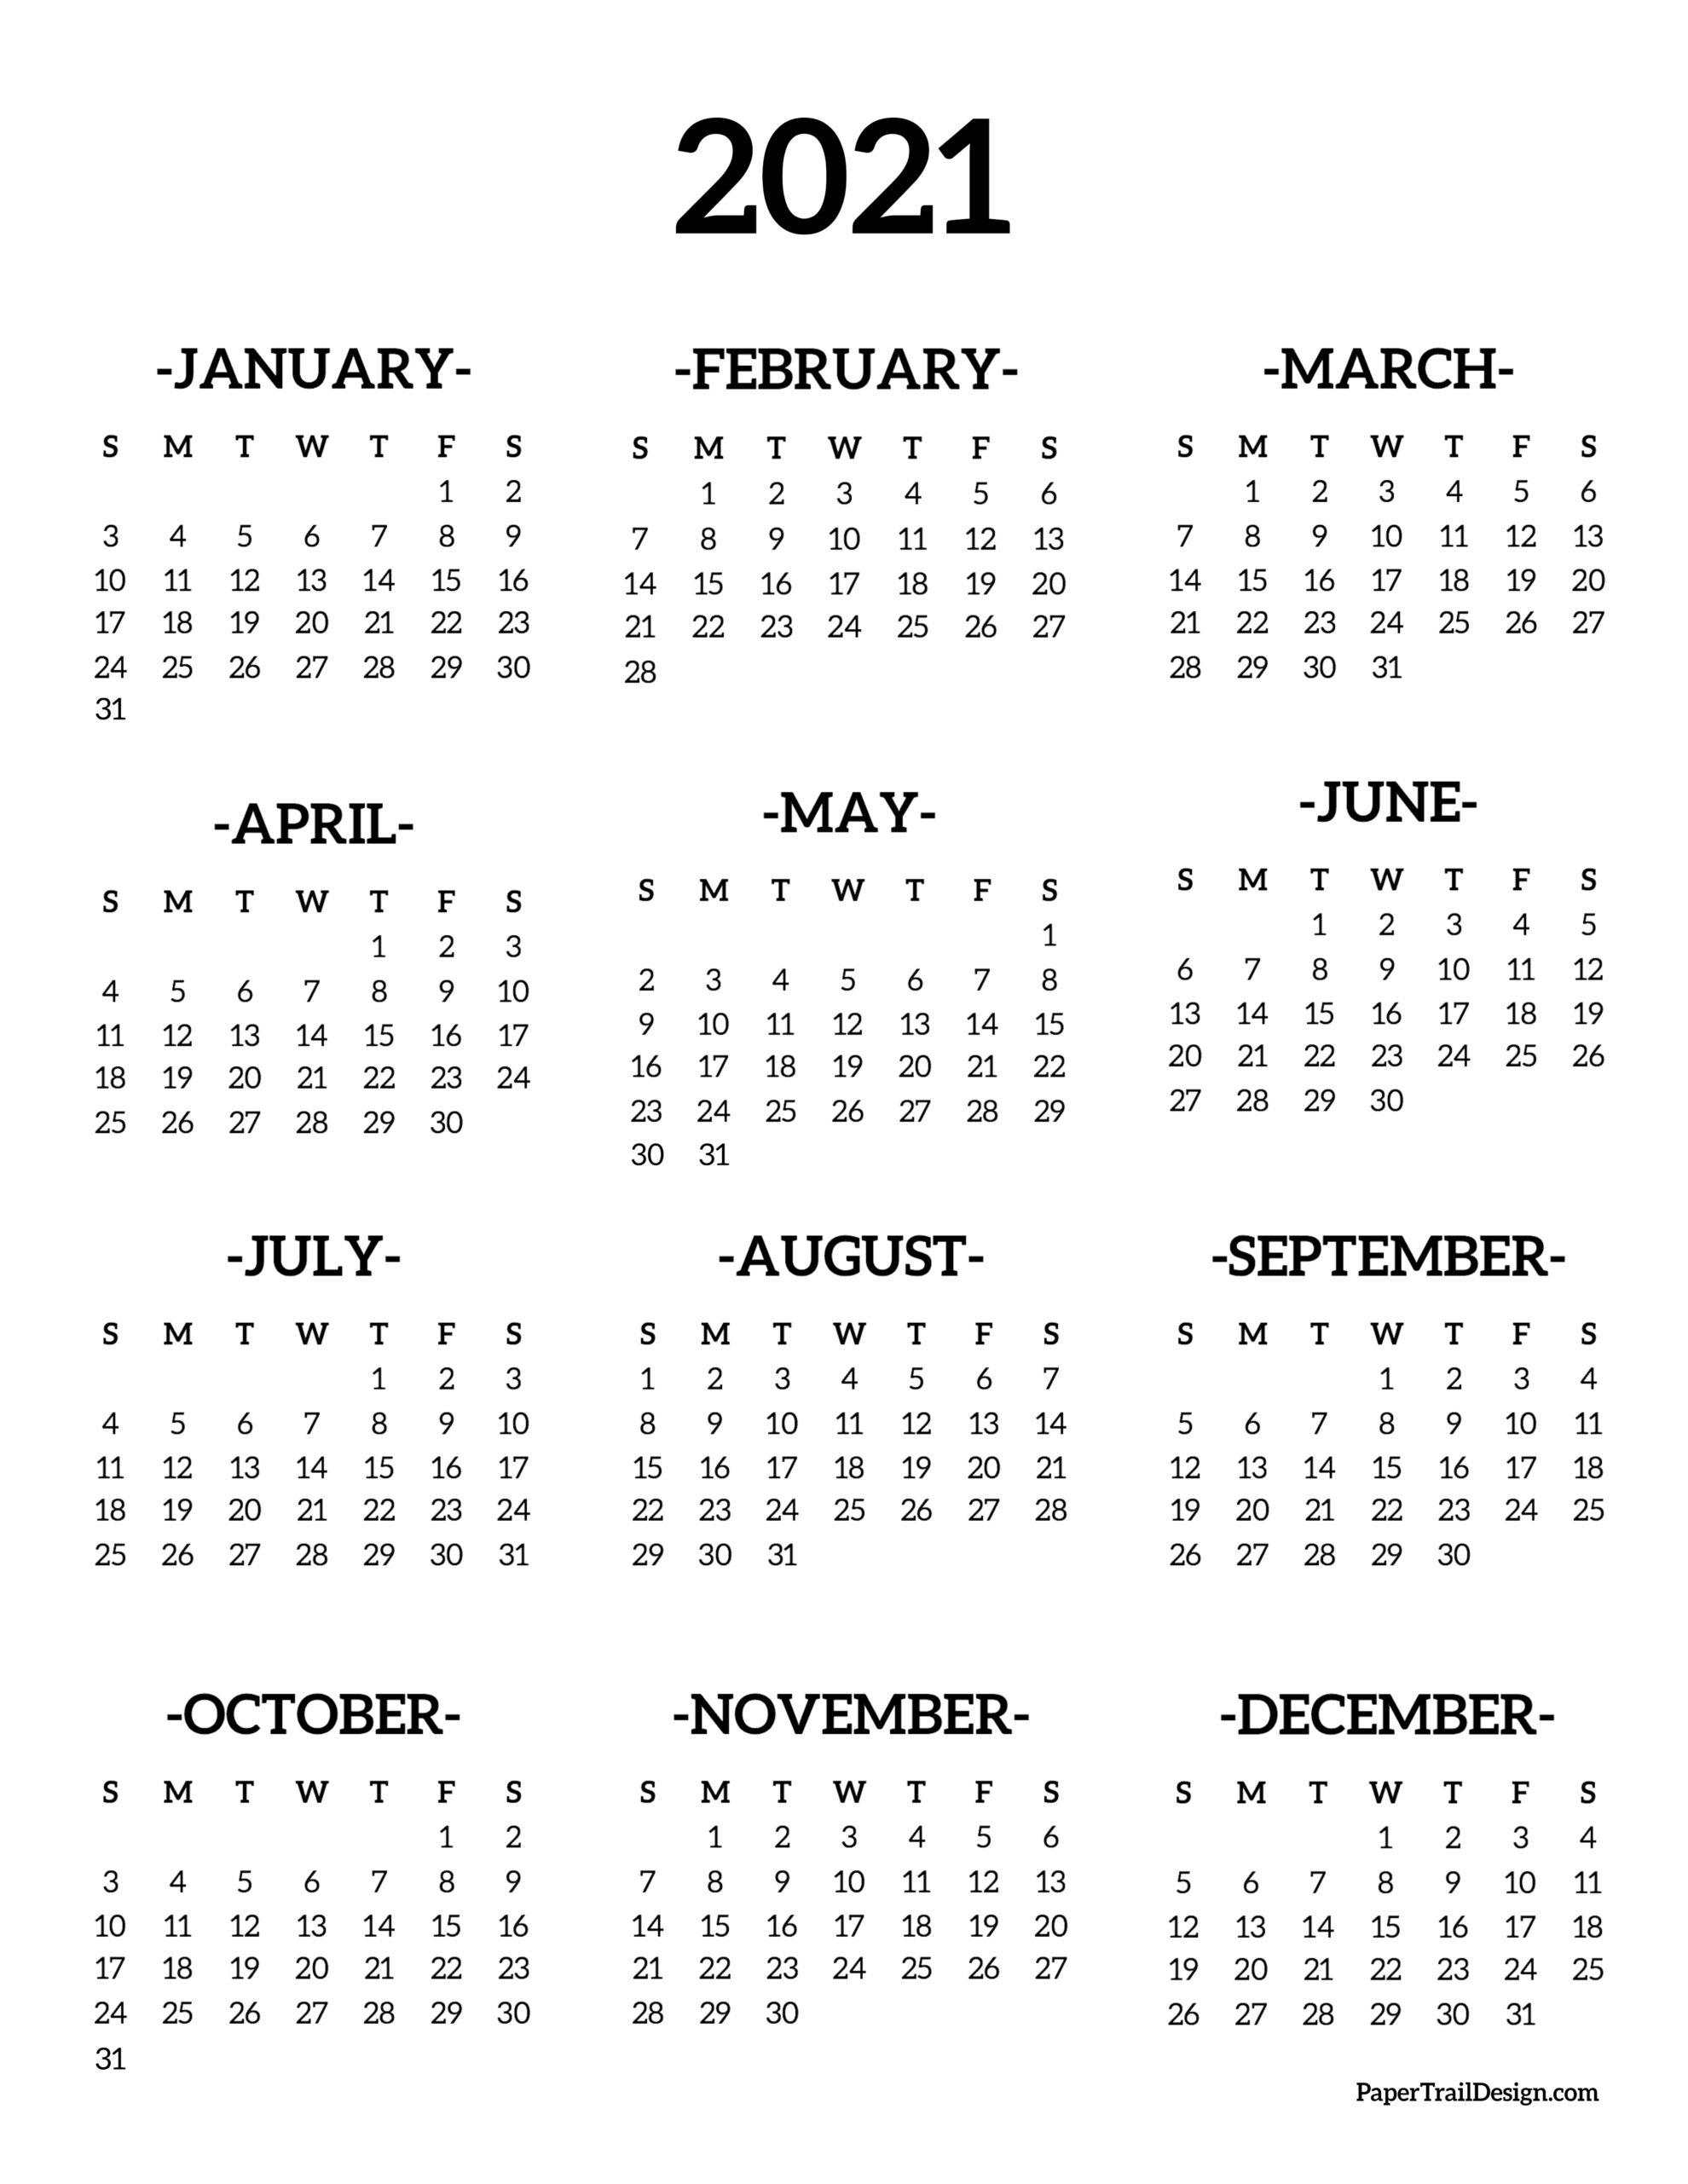 Calendar 2021 Printable One Page Paper Trail Design